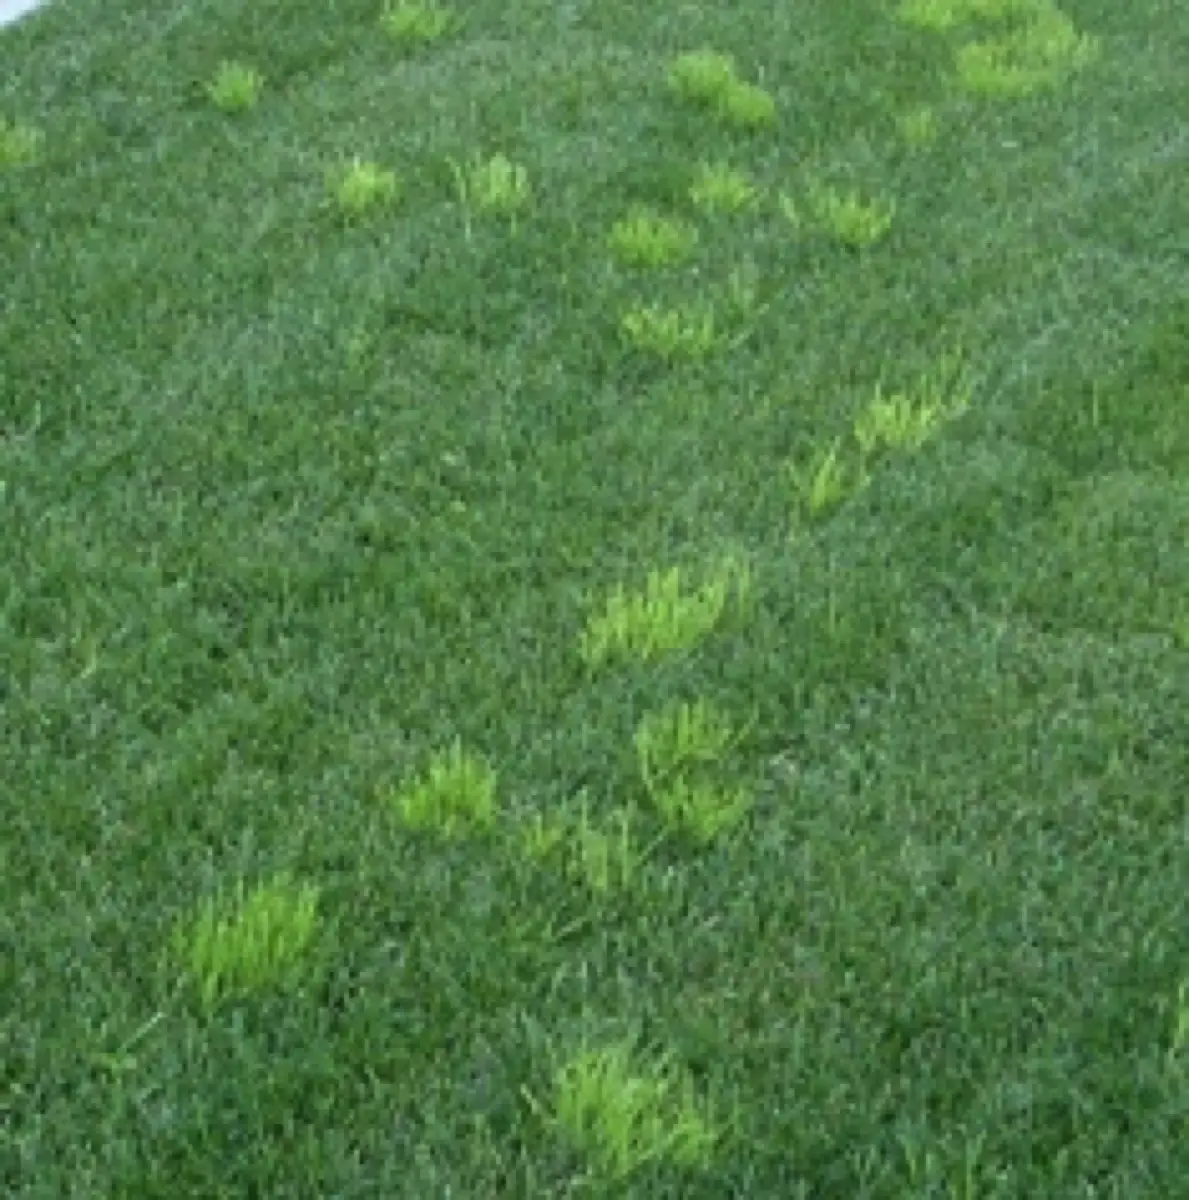 Poa Annua Weed Control &  18 Recommended Treatment Options